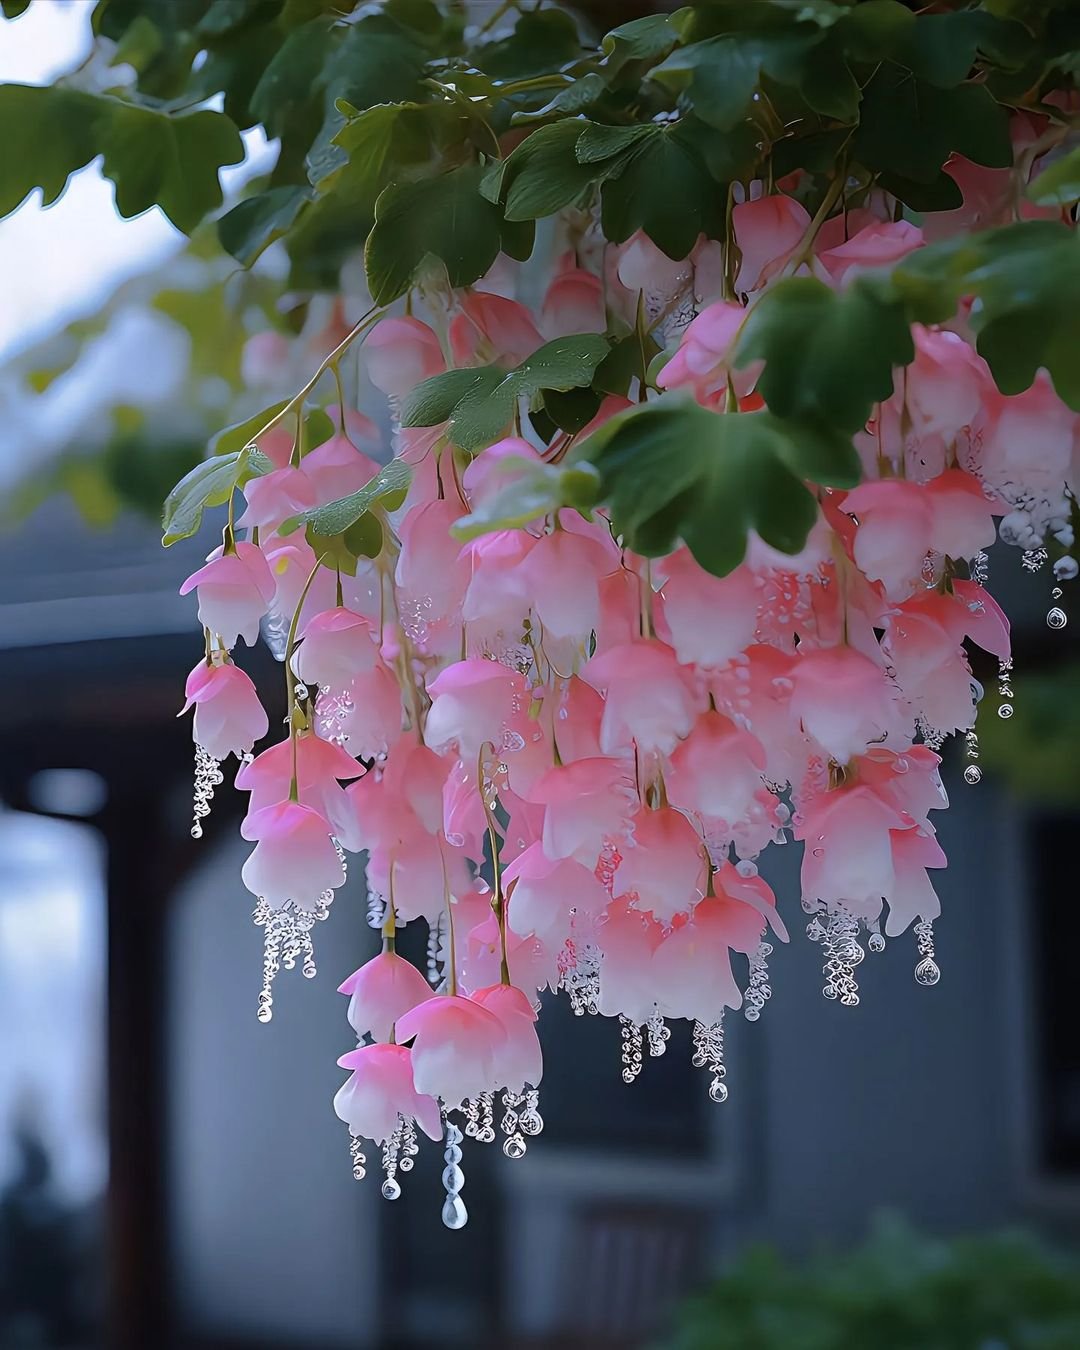 Pink Begonia flower hanging gracefully from a tree branch.